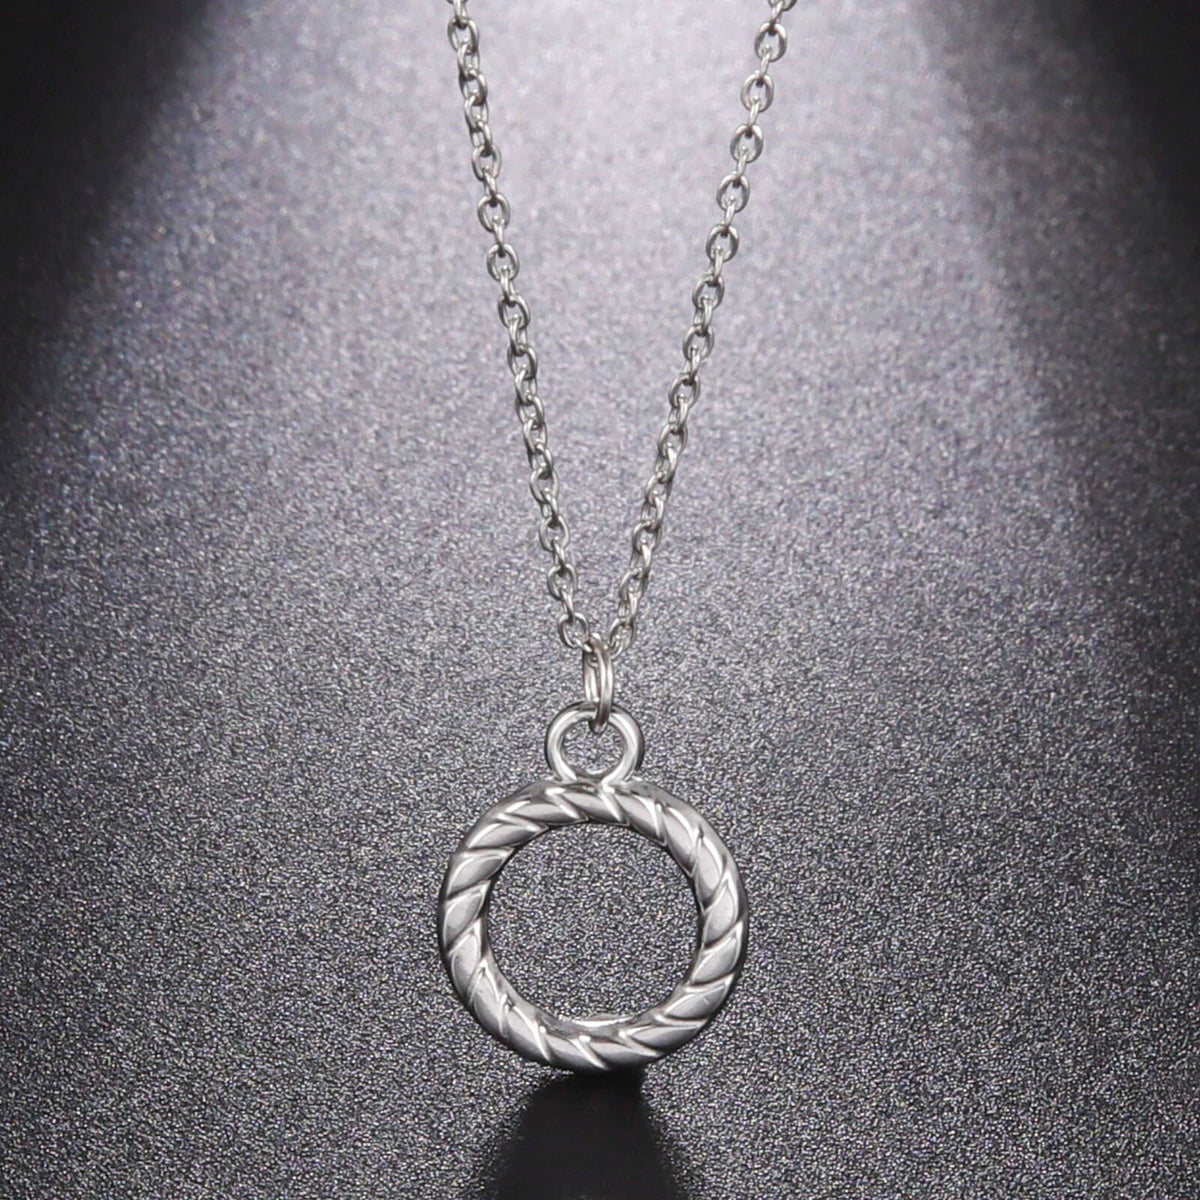 Minimalist Necklace with Round Pendant in Stainless Steel